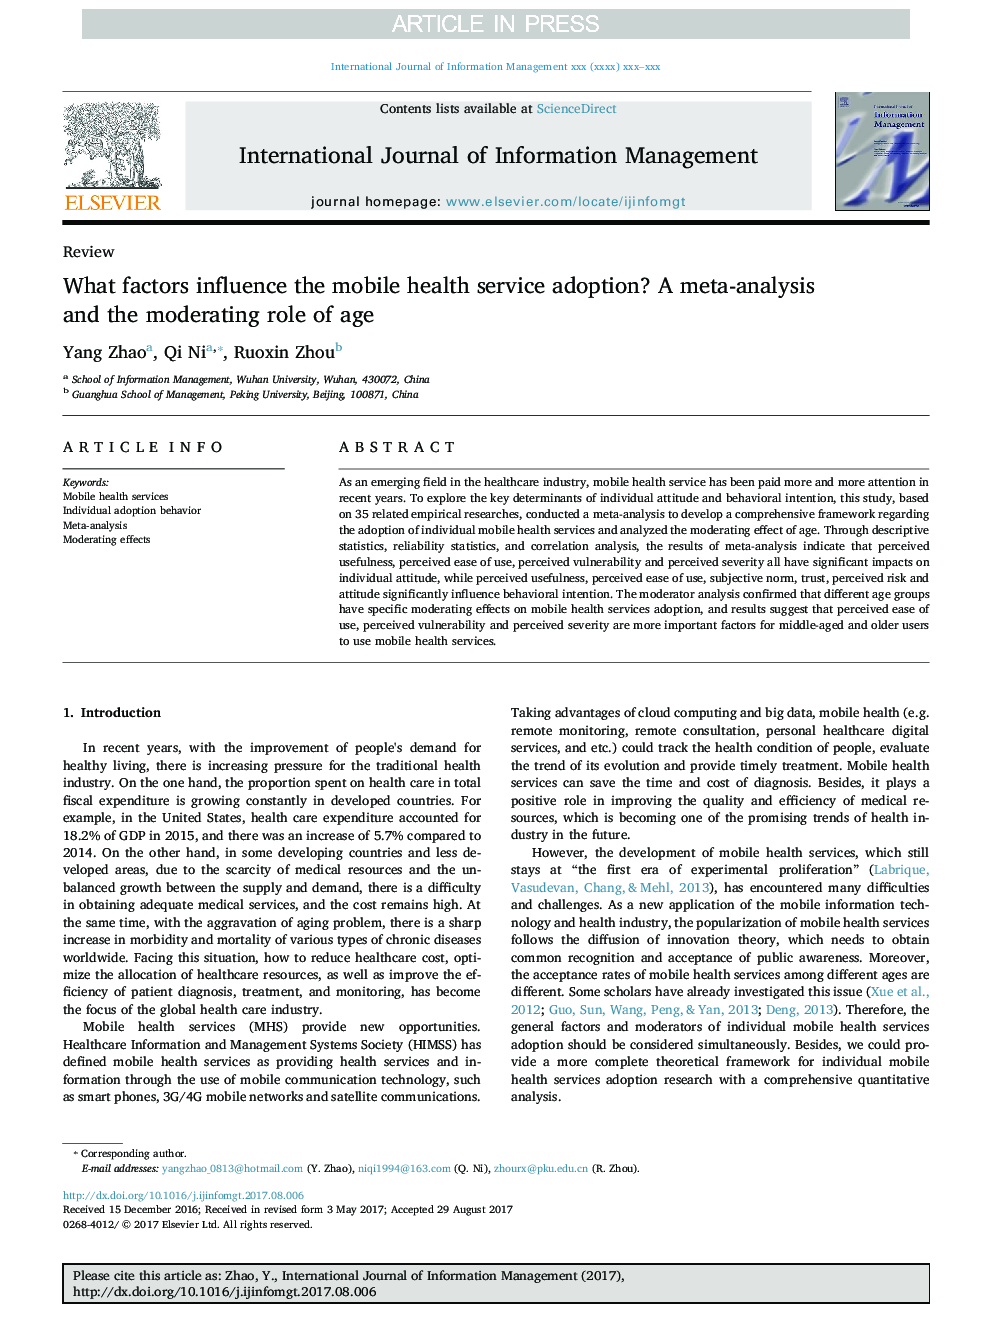 What factors influence the mobile health service adoption? A meta-analysis and the moderating role of age